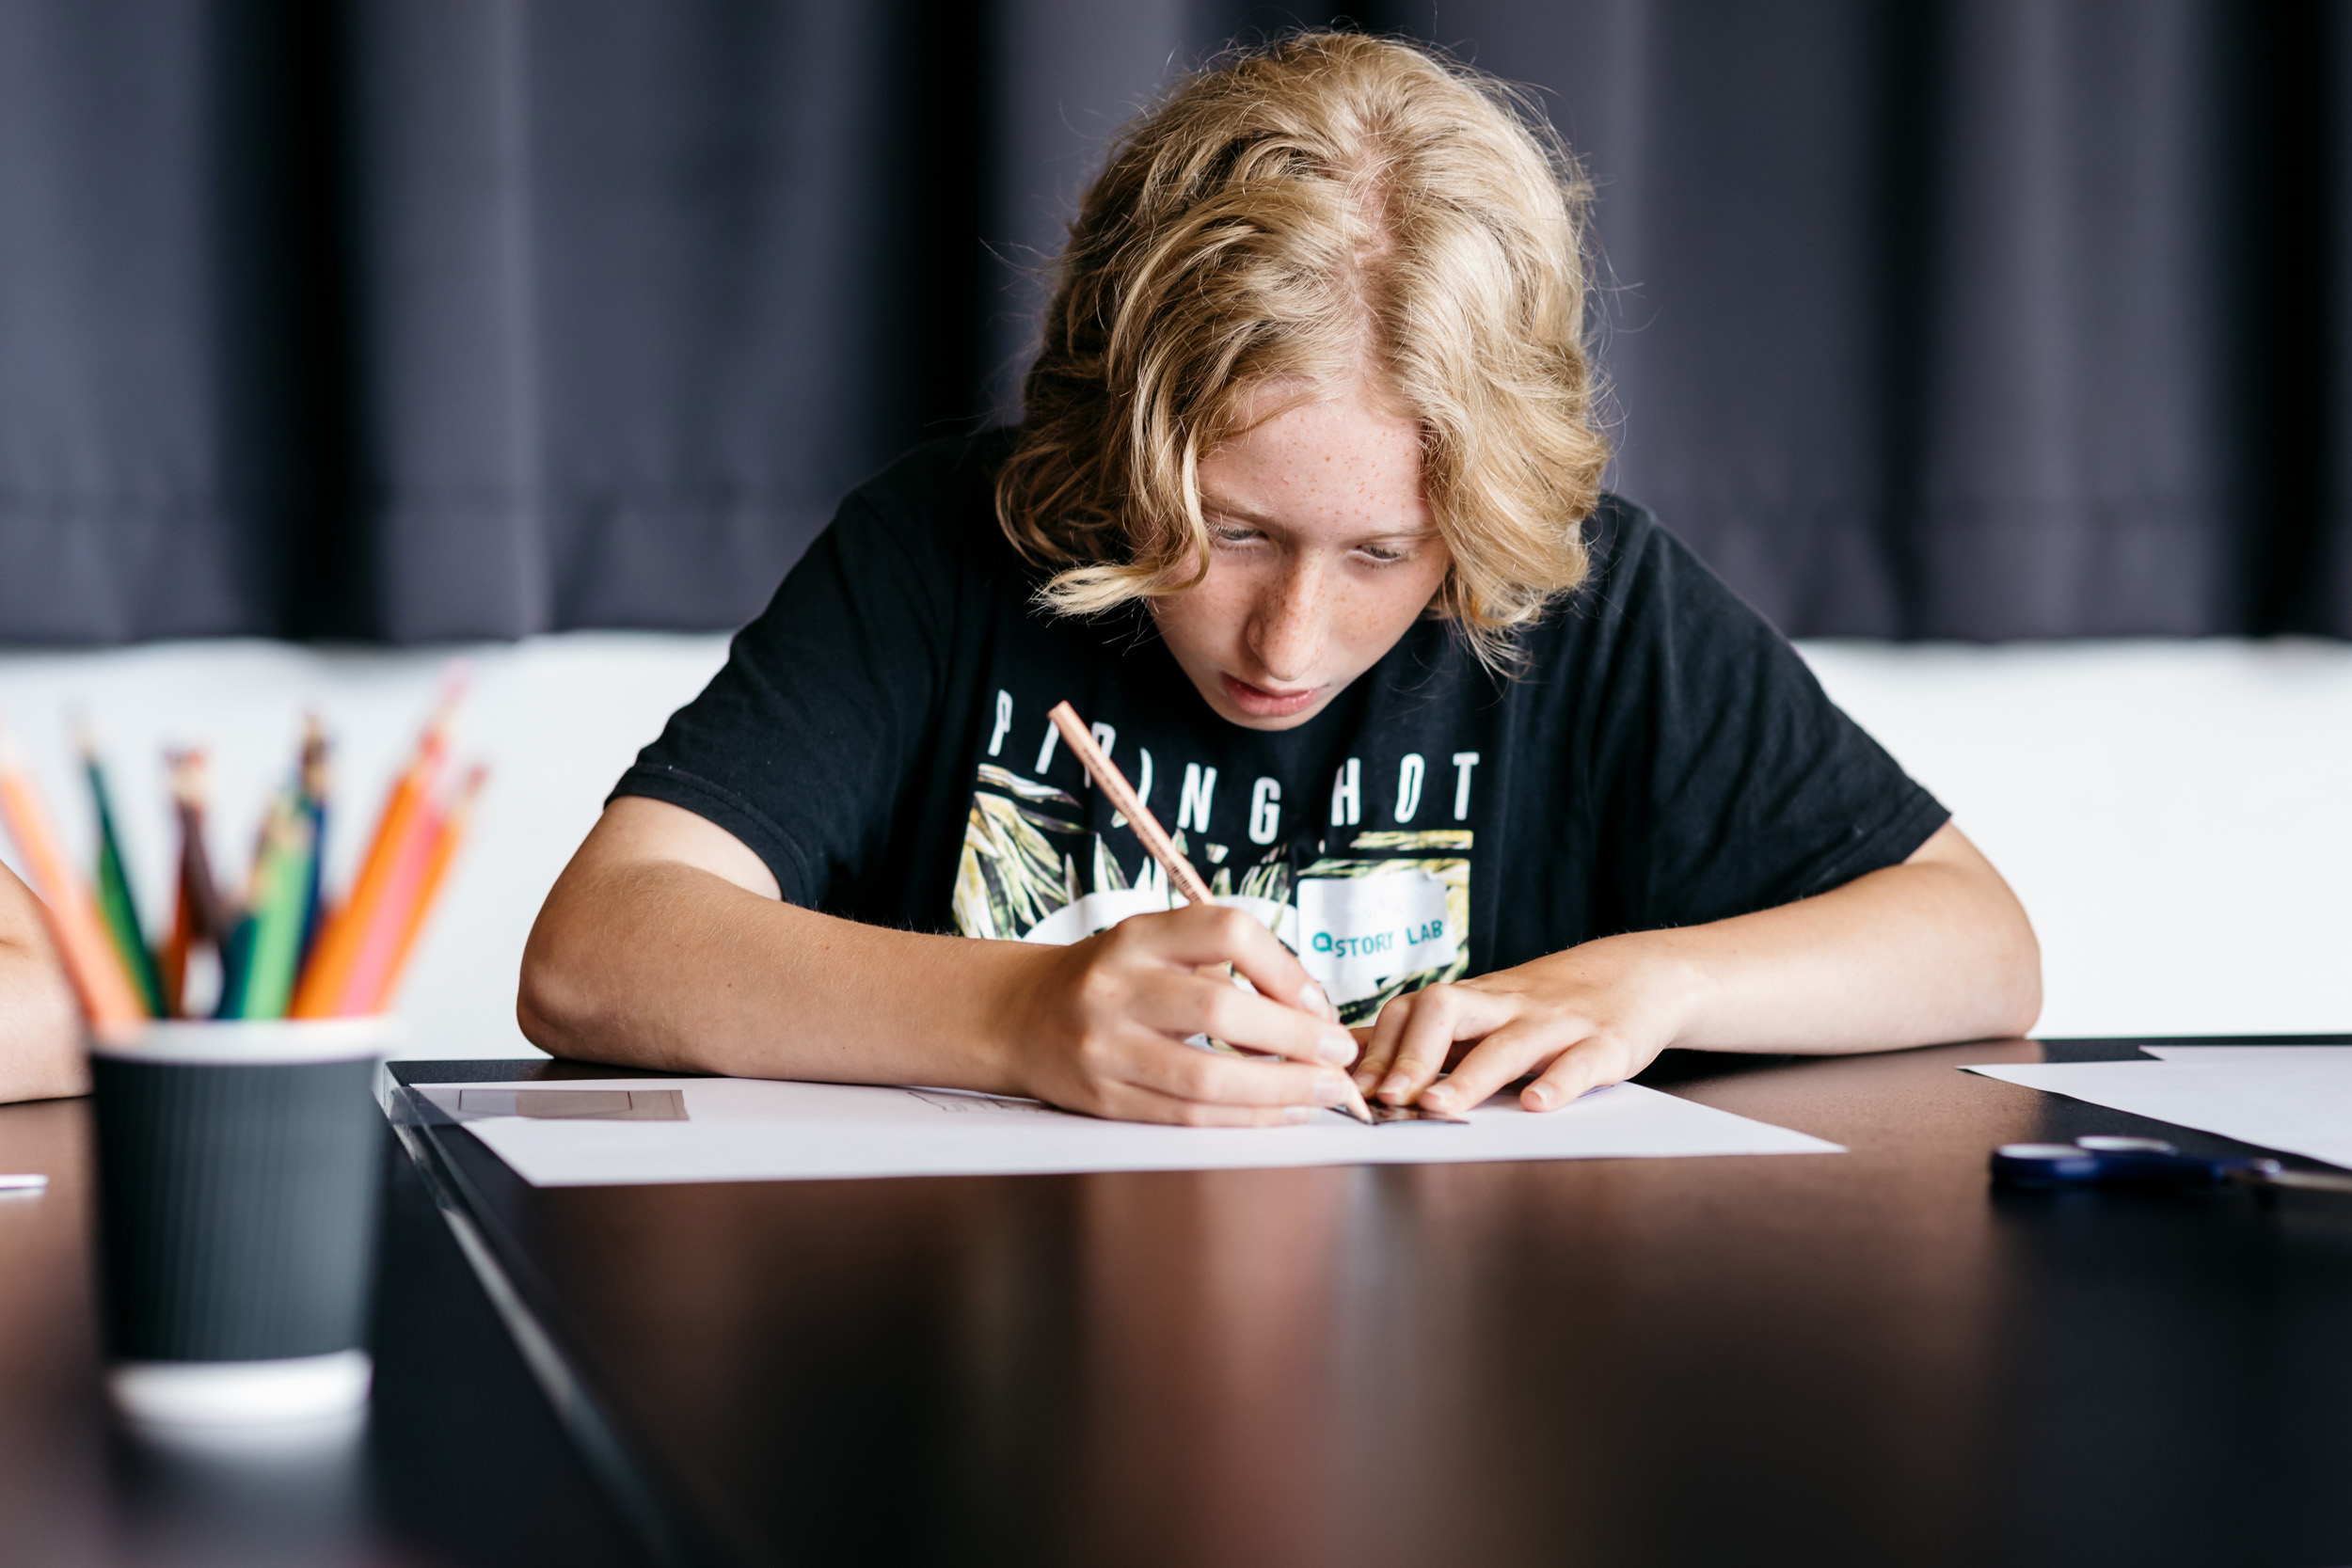 Teenager creating a book